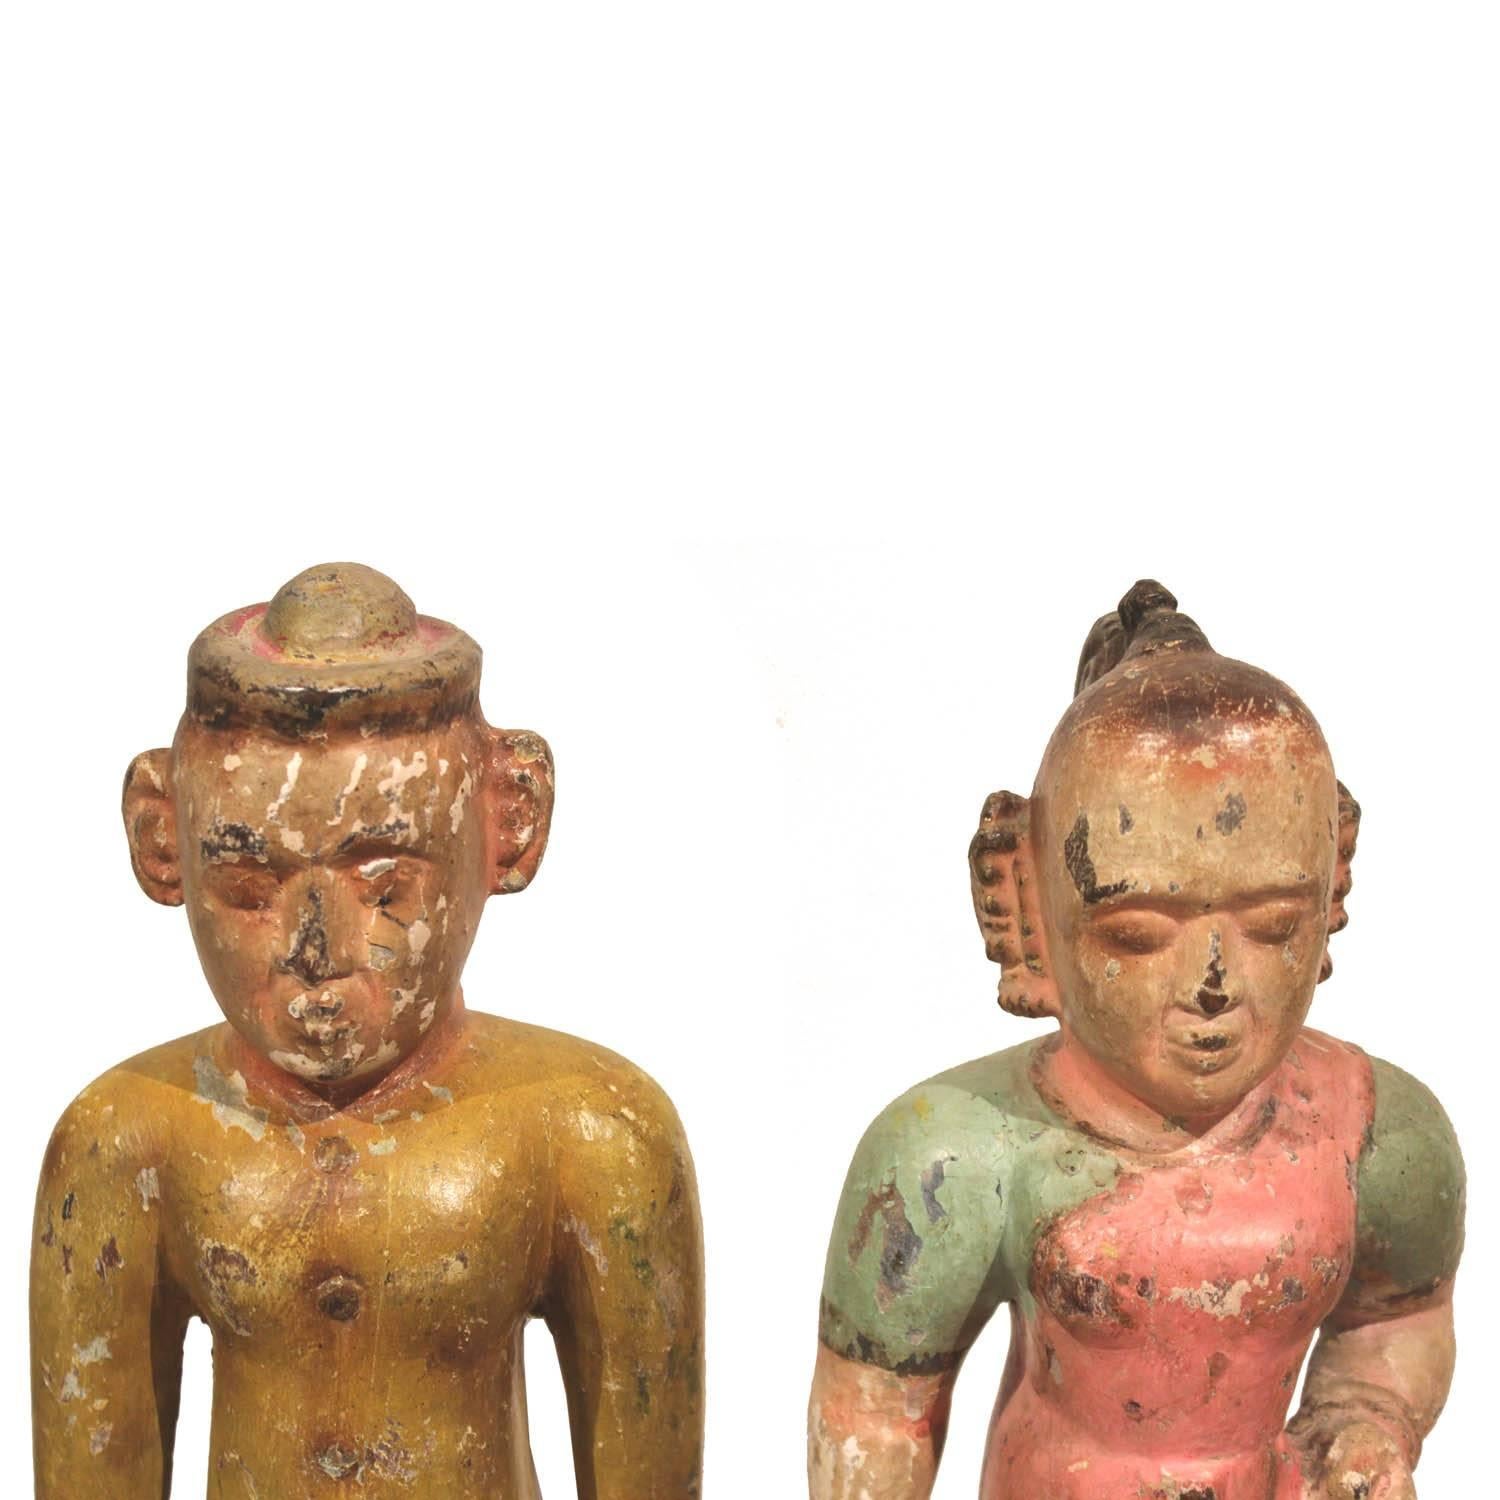 Primitive Folk Art, one of a kind hand-carved wooden dolls depicting a statue of a man and wife from southern India.
       